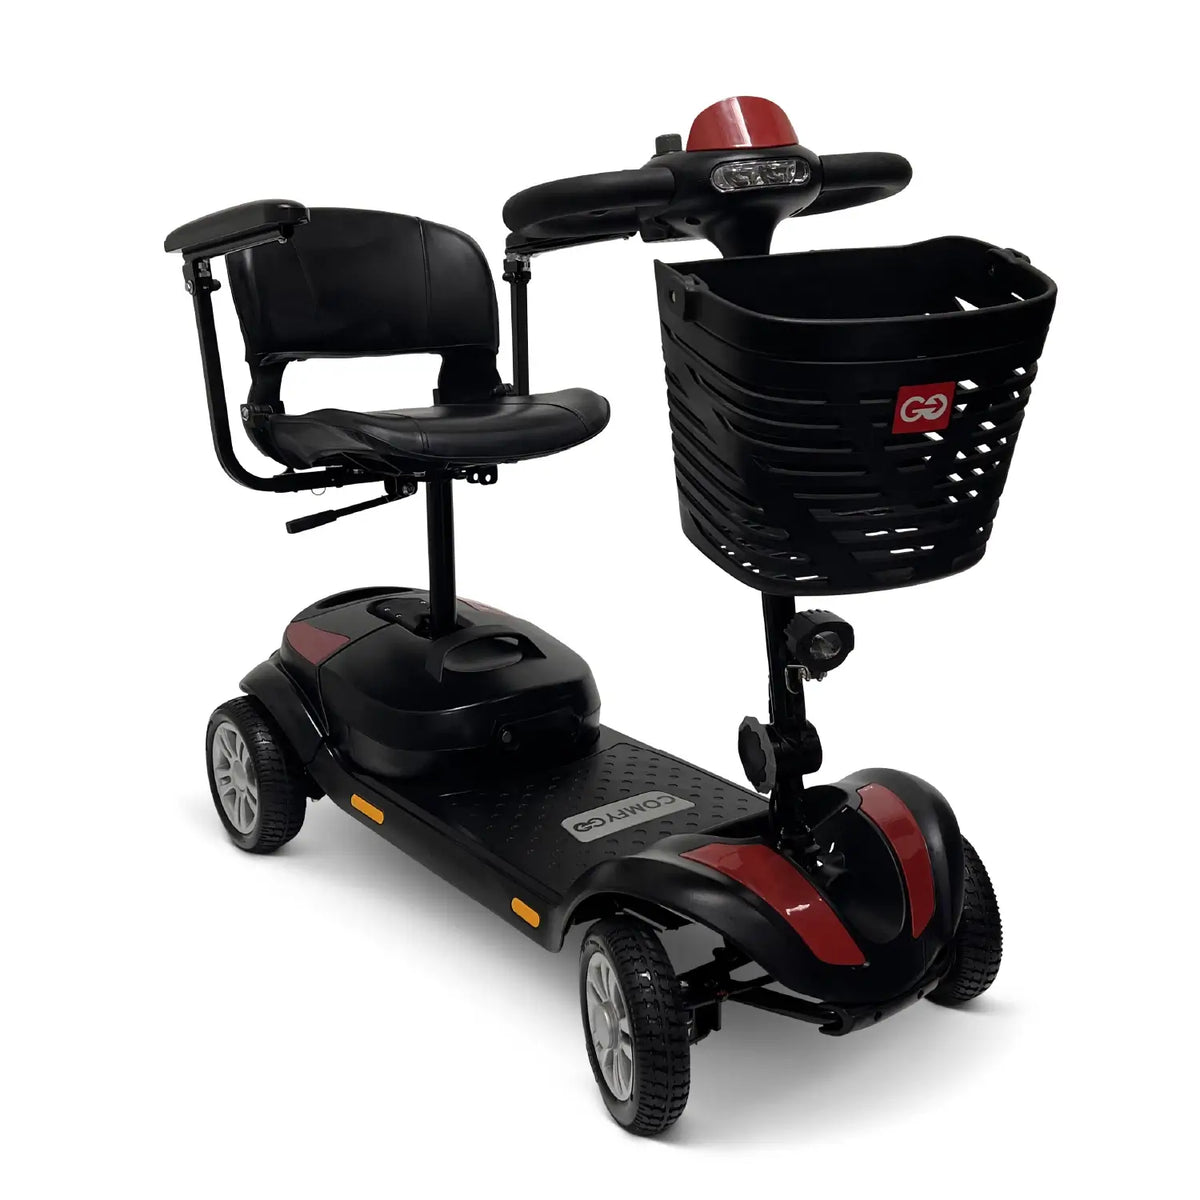 ComfyGo Z-4 Electric Mobility Scooter